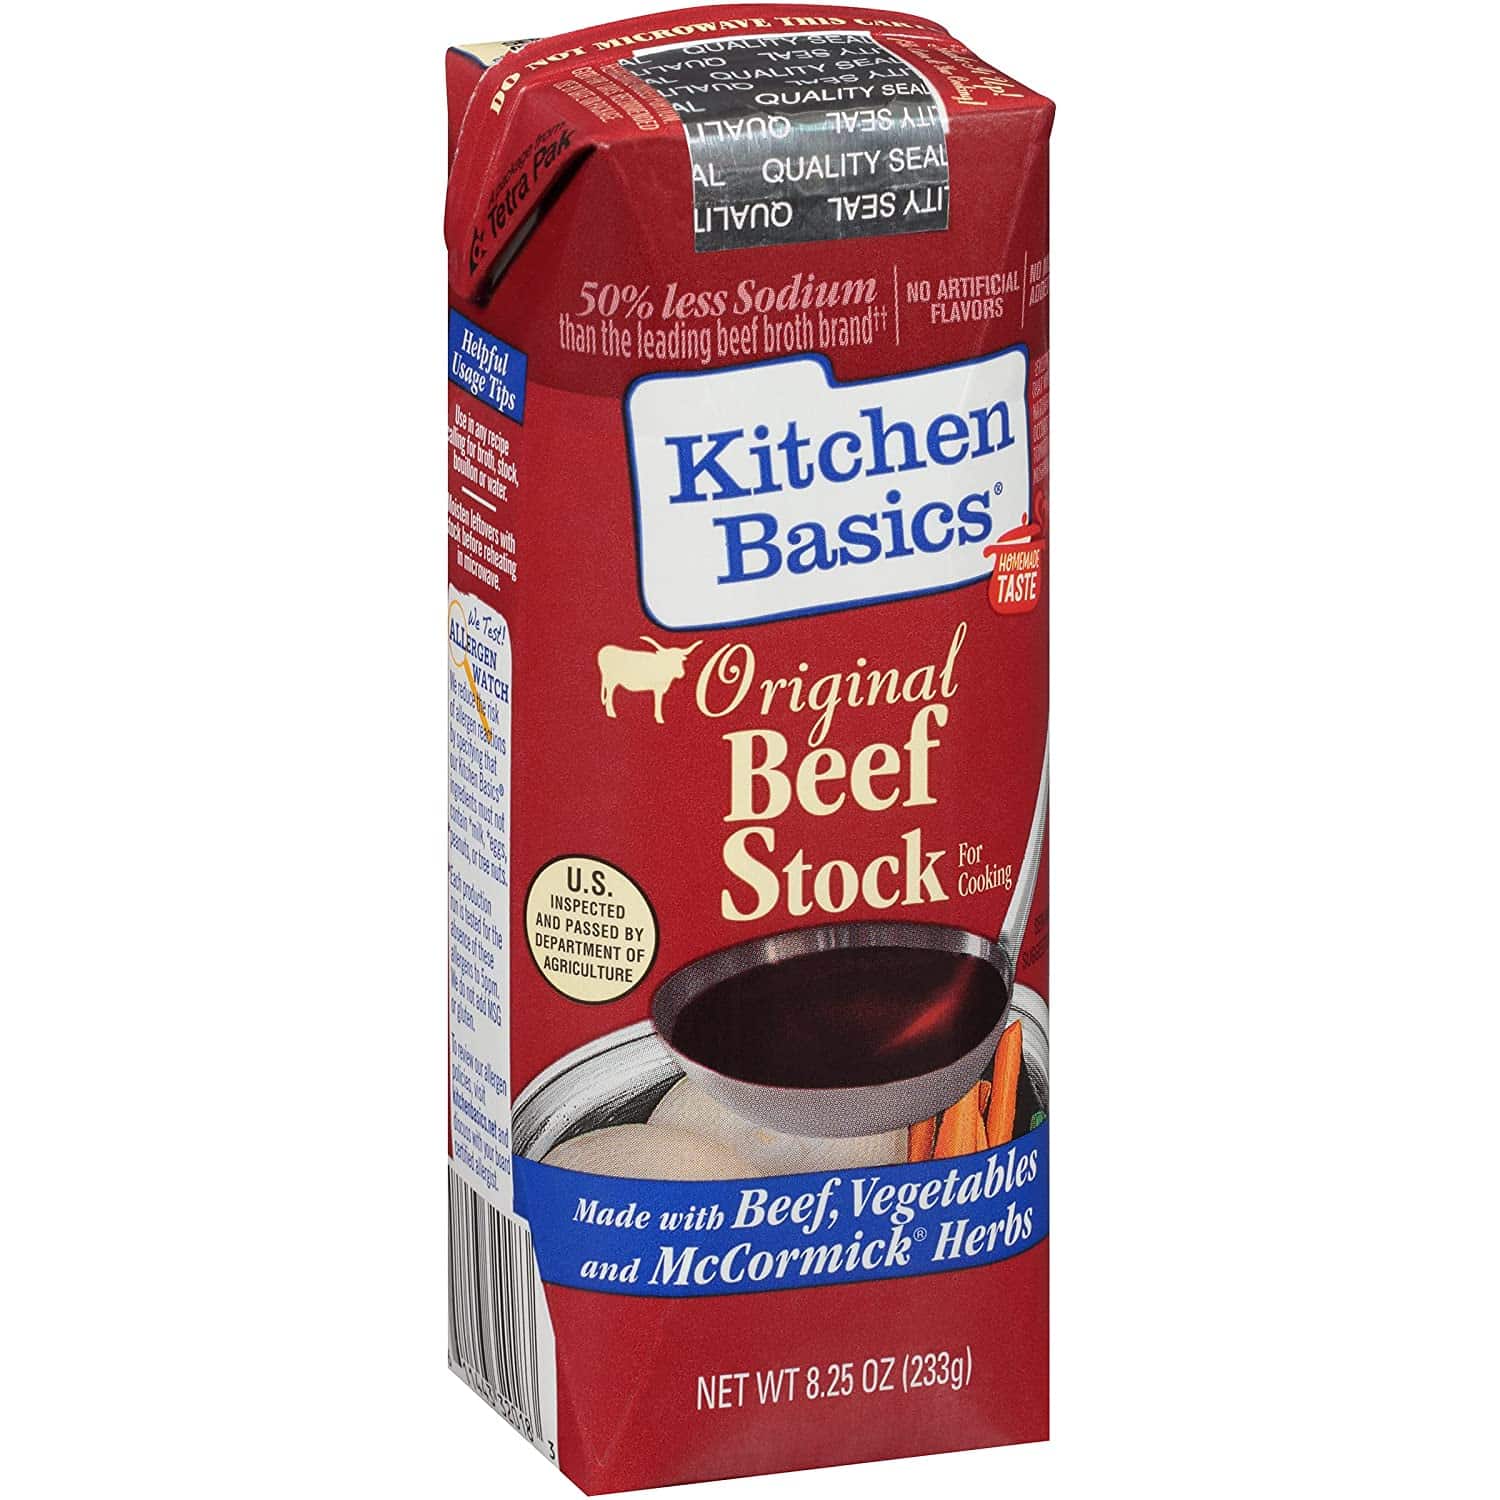 Substitute Chicken Broth for Beef Broth